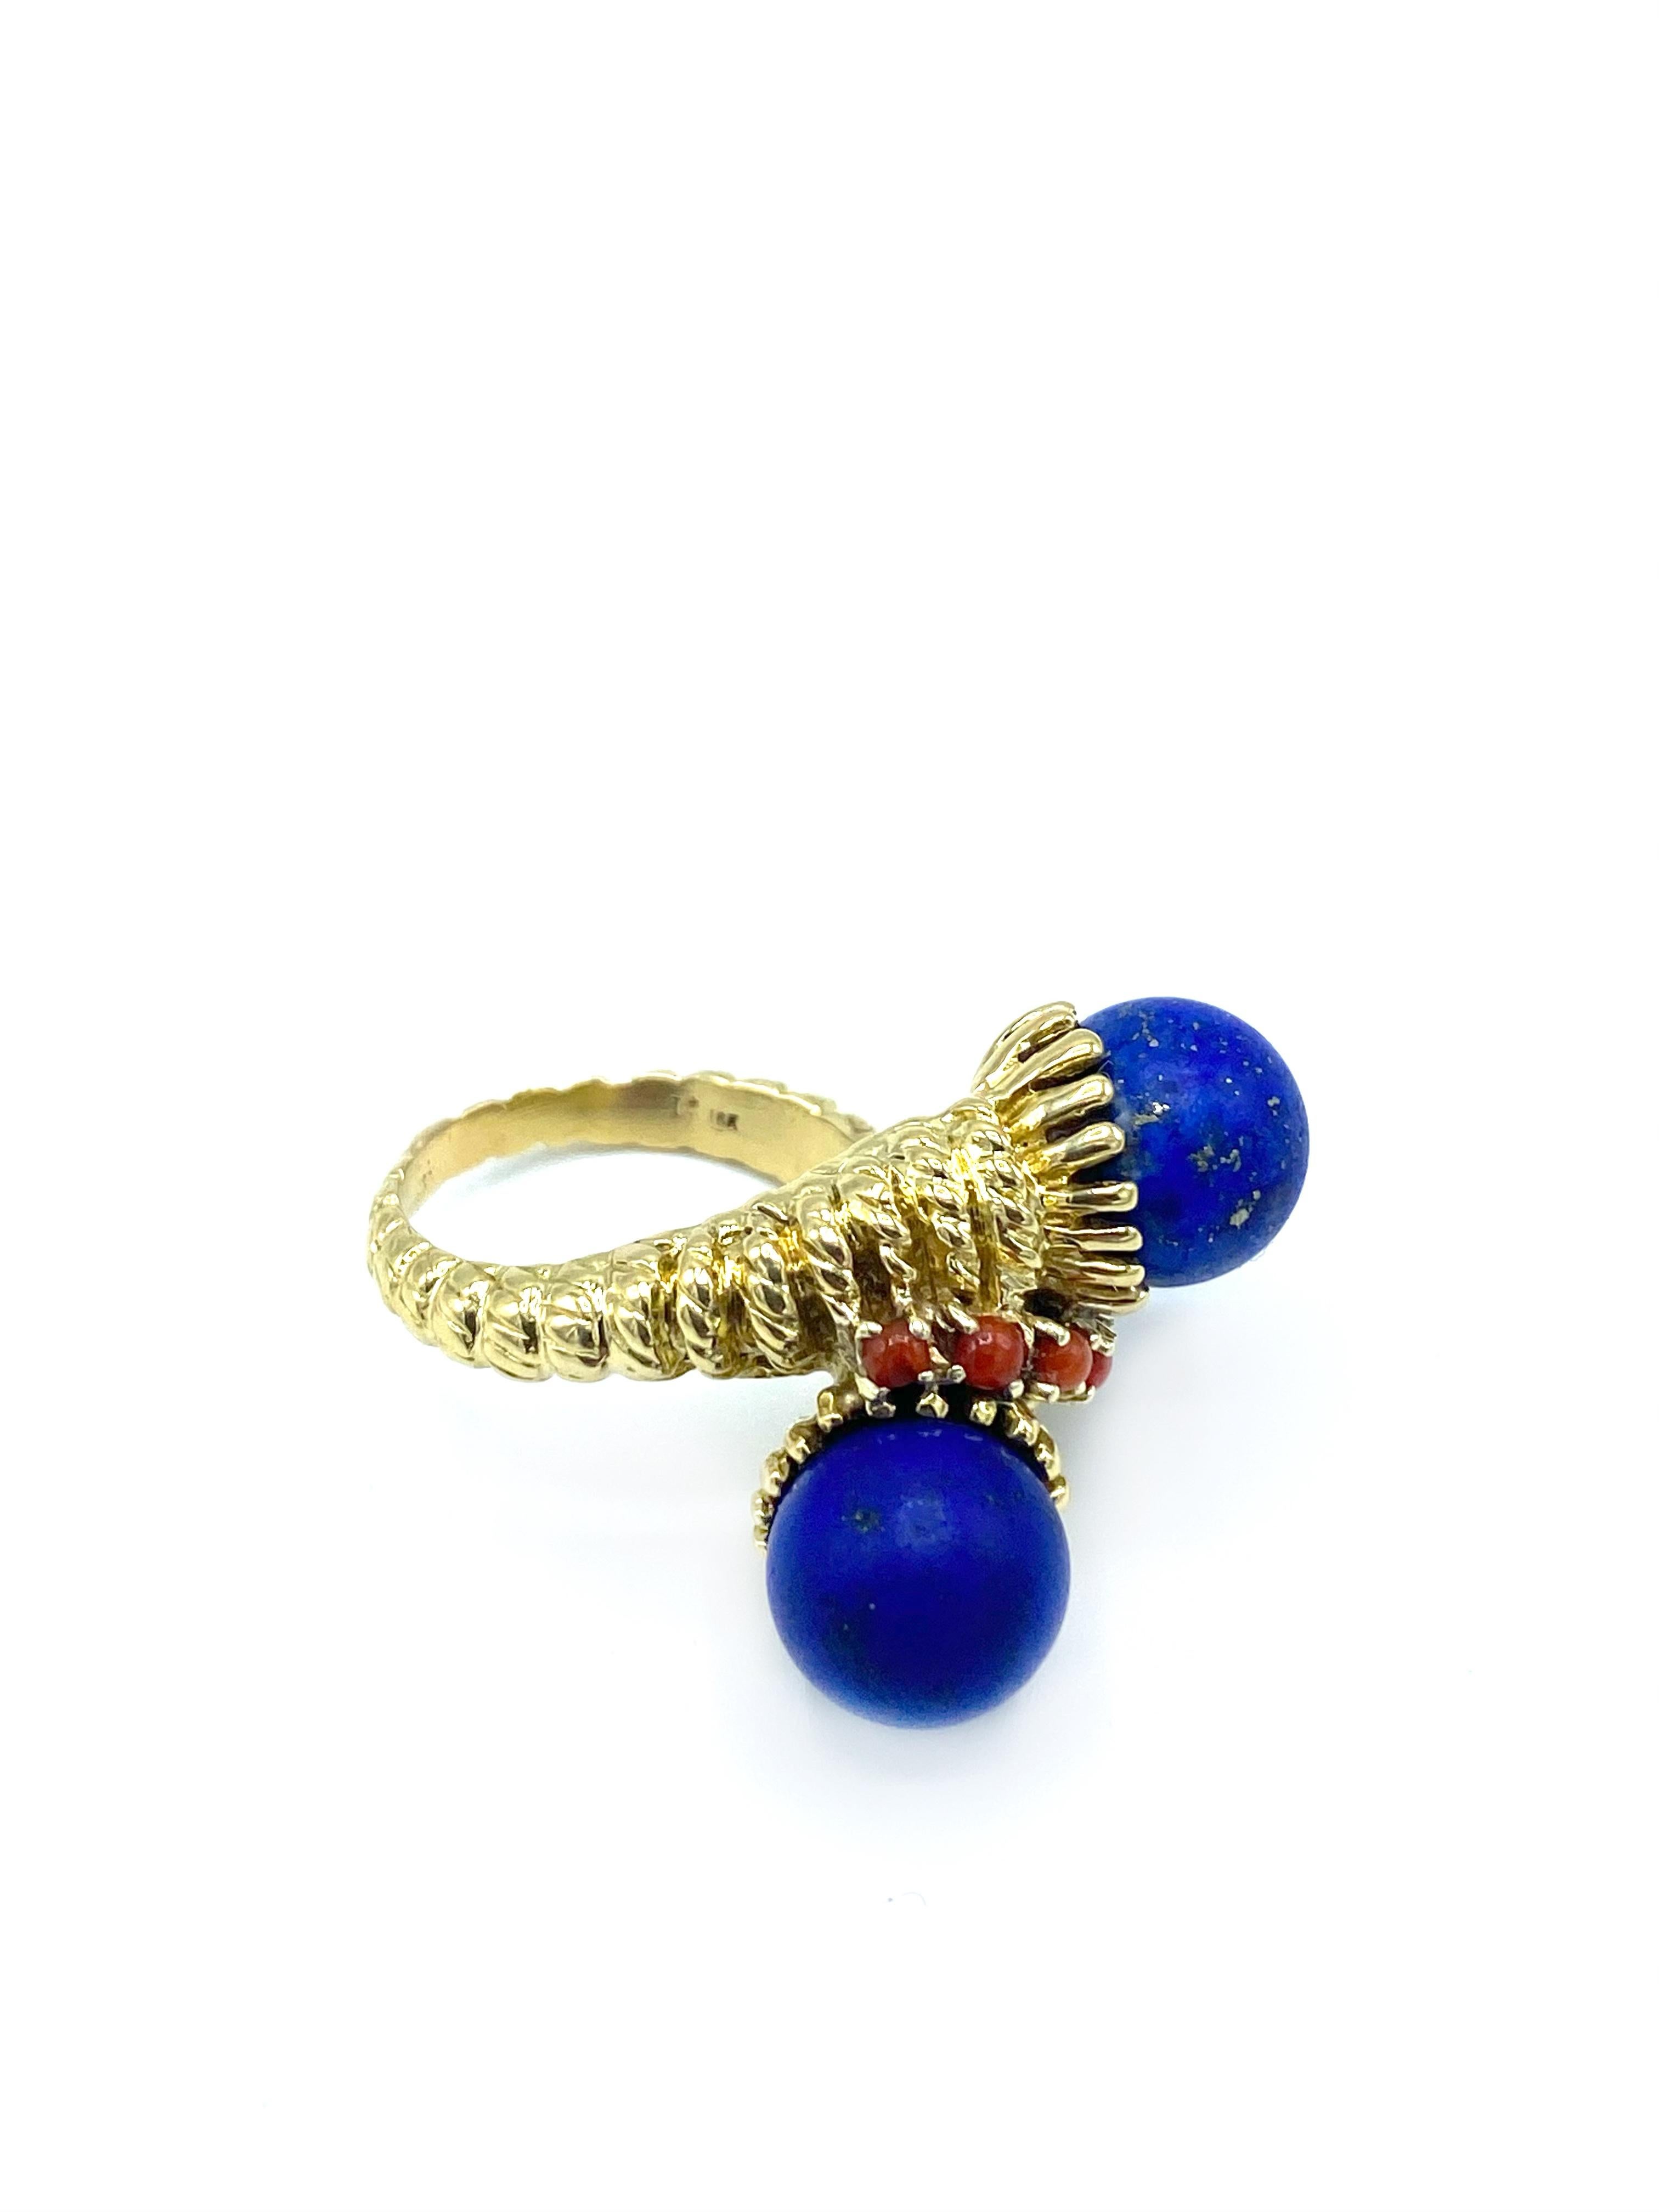 Women's or Men's Vintage Yellow Gold, Lapis and Coral Bypass Coctail Ring 